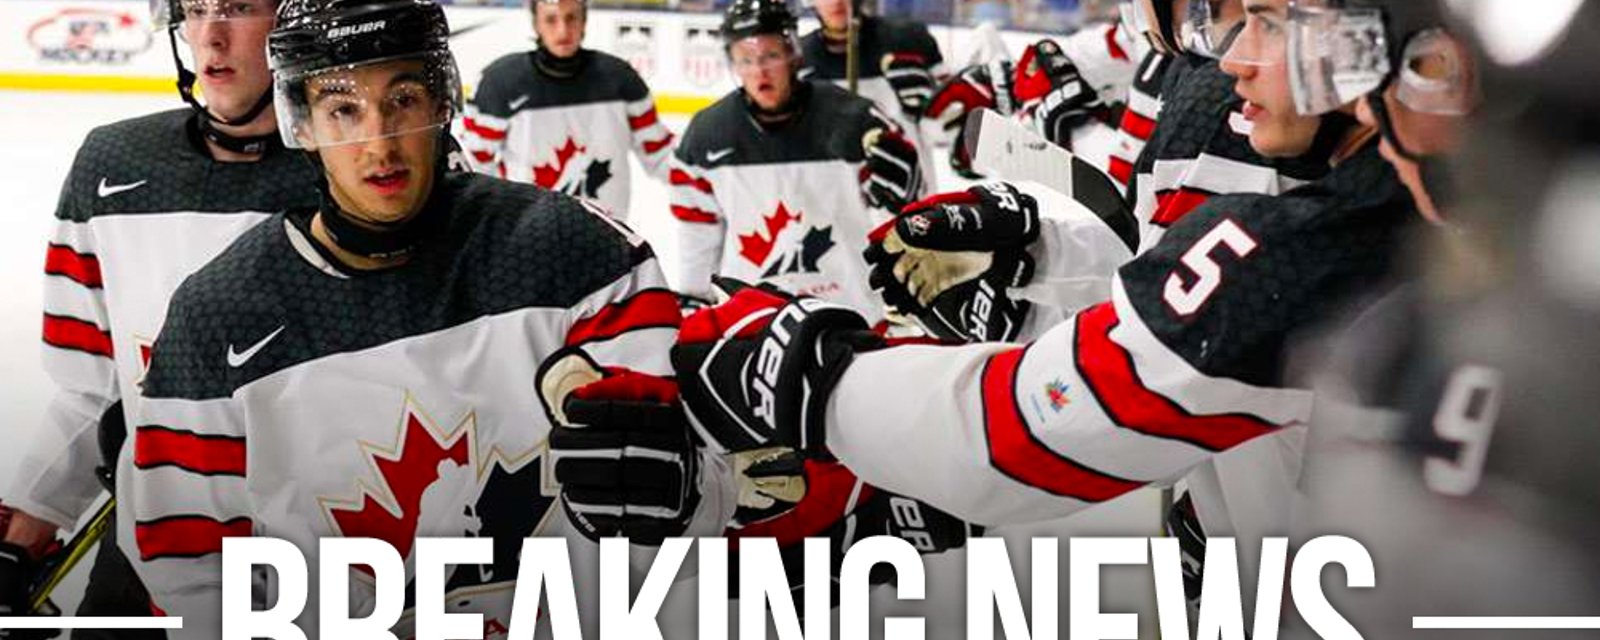 At least six more players out of World Juniors, rumours that entire teams could drop out